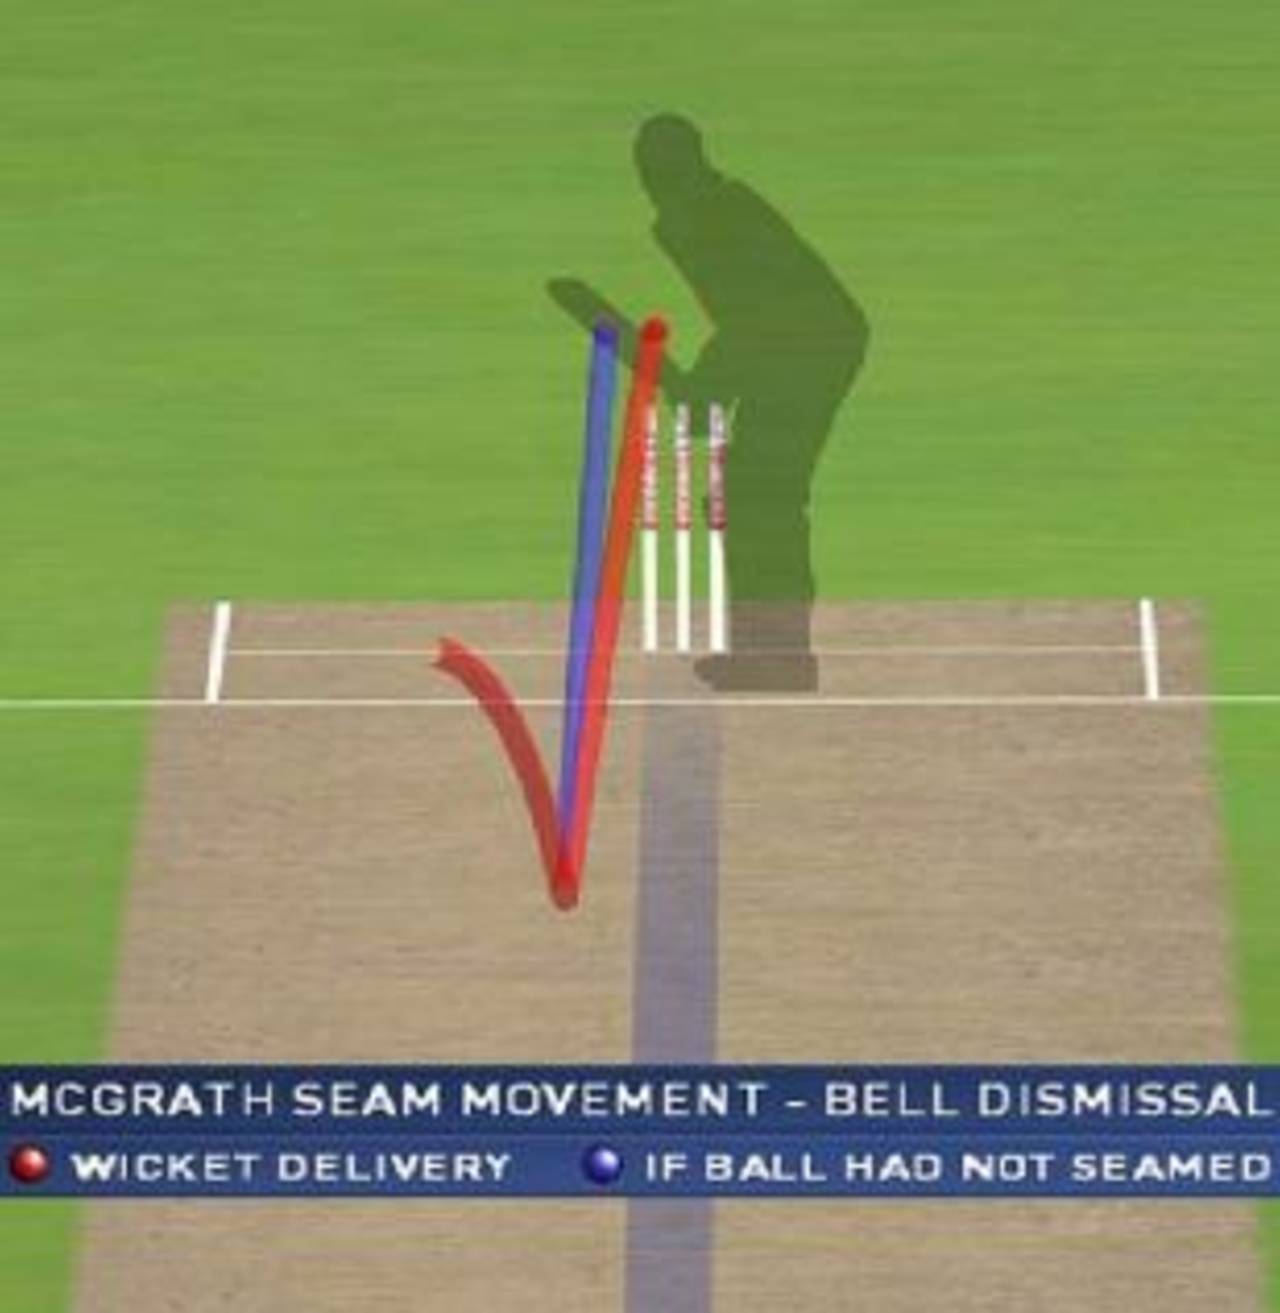 As the BCCI insists, the pitch mat can be manipulated, but it's not to anyone's advantage to do it&nbsp;&nbsp;&bull;&nbsp;&nbsp;Hawk-Eye Innovations